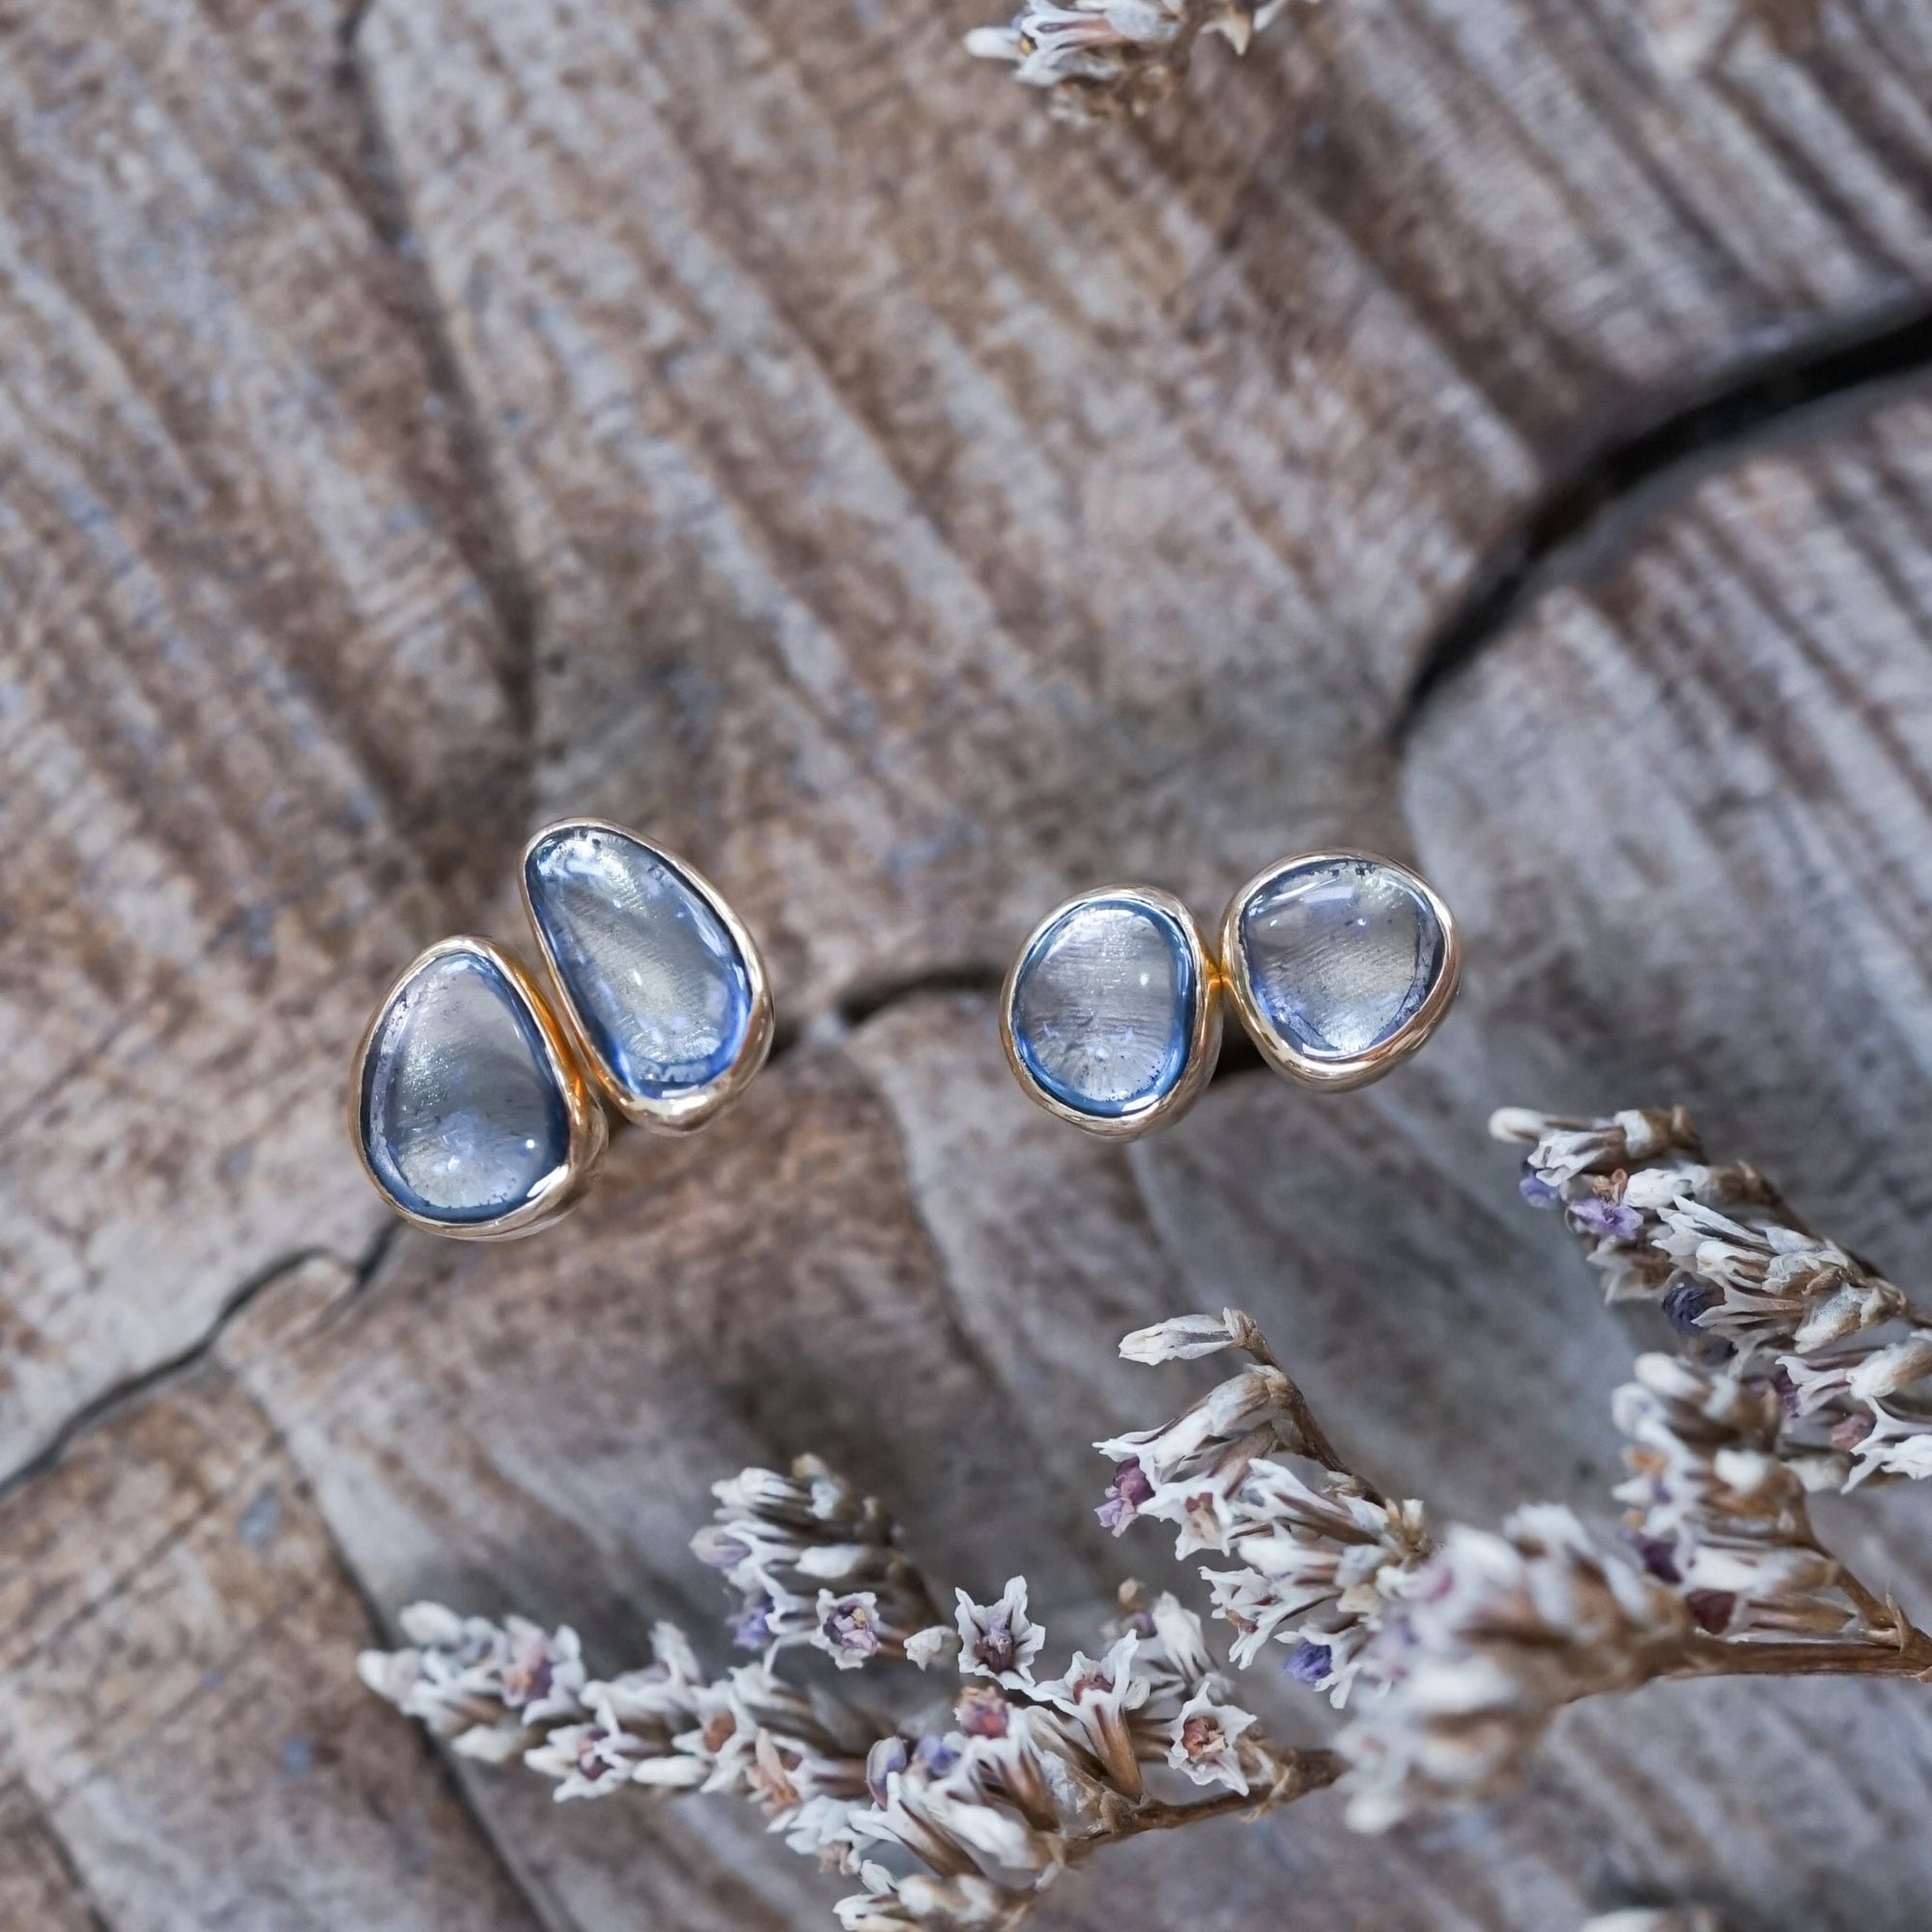 Yogo Sapphire Earrings in Ethical Gold - Gardens of the Sun | Ethical Jewelry